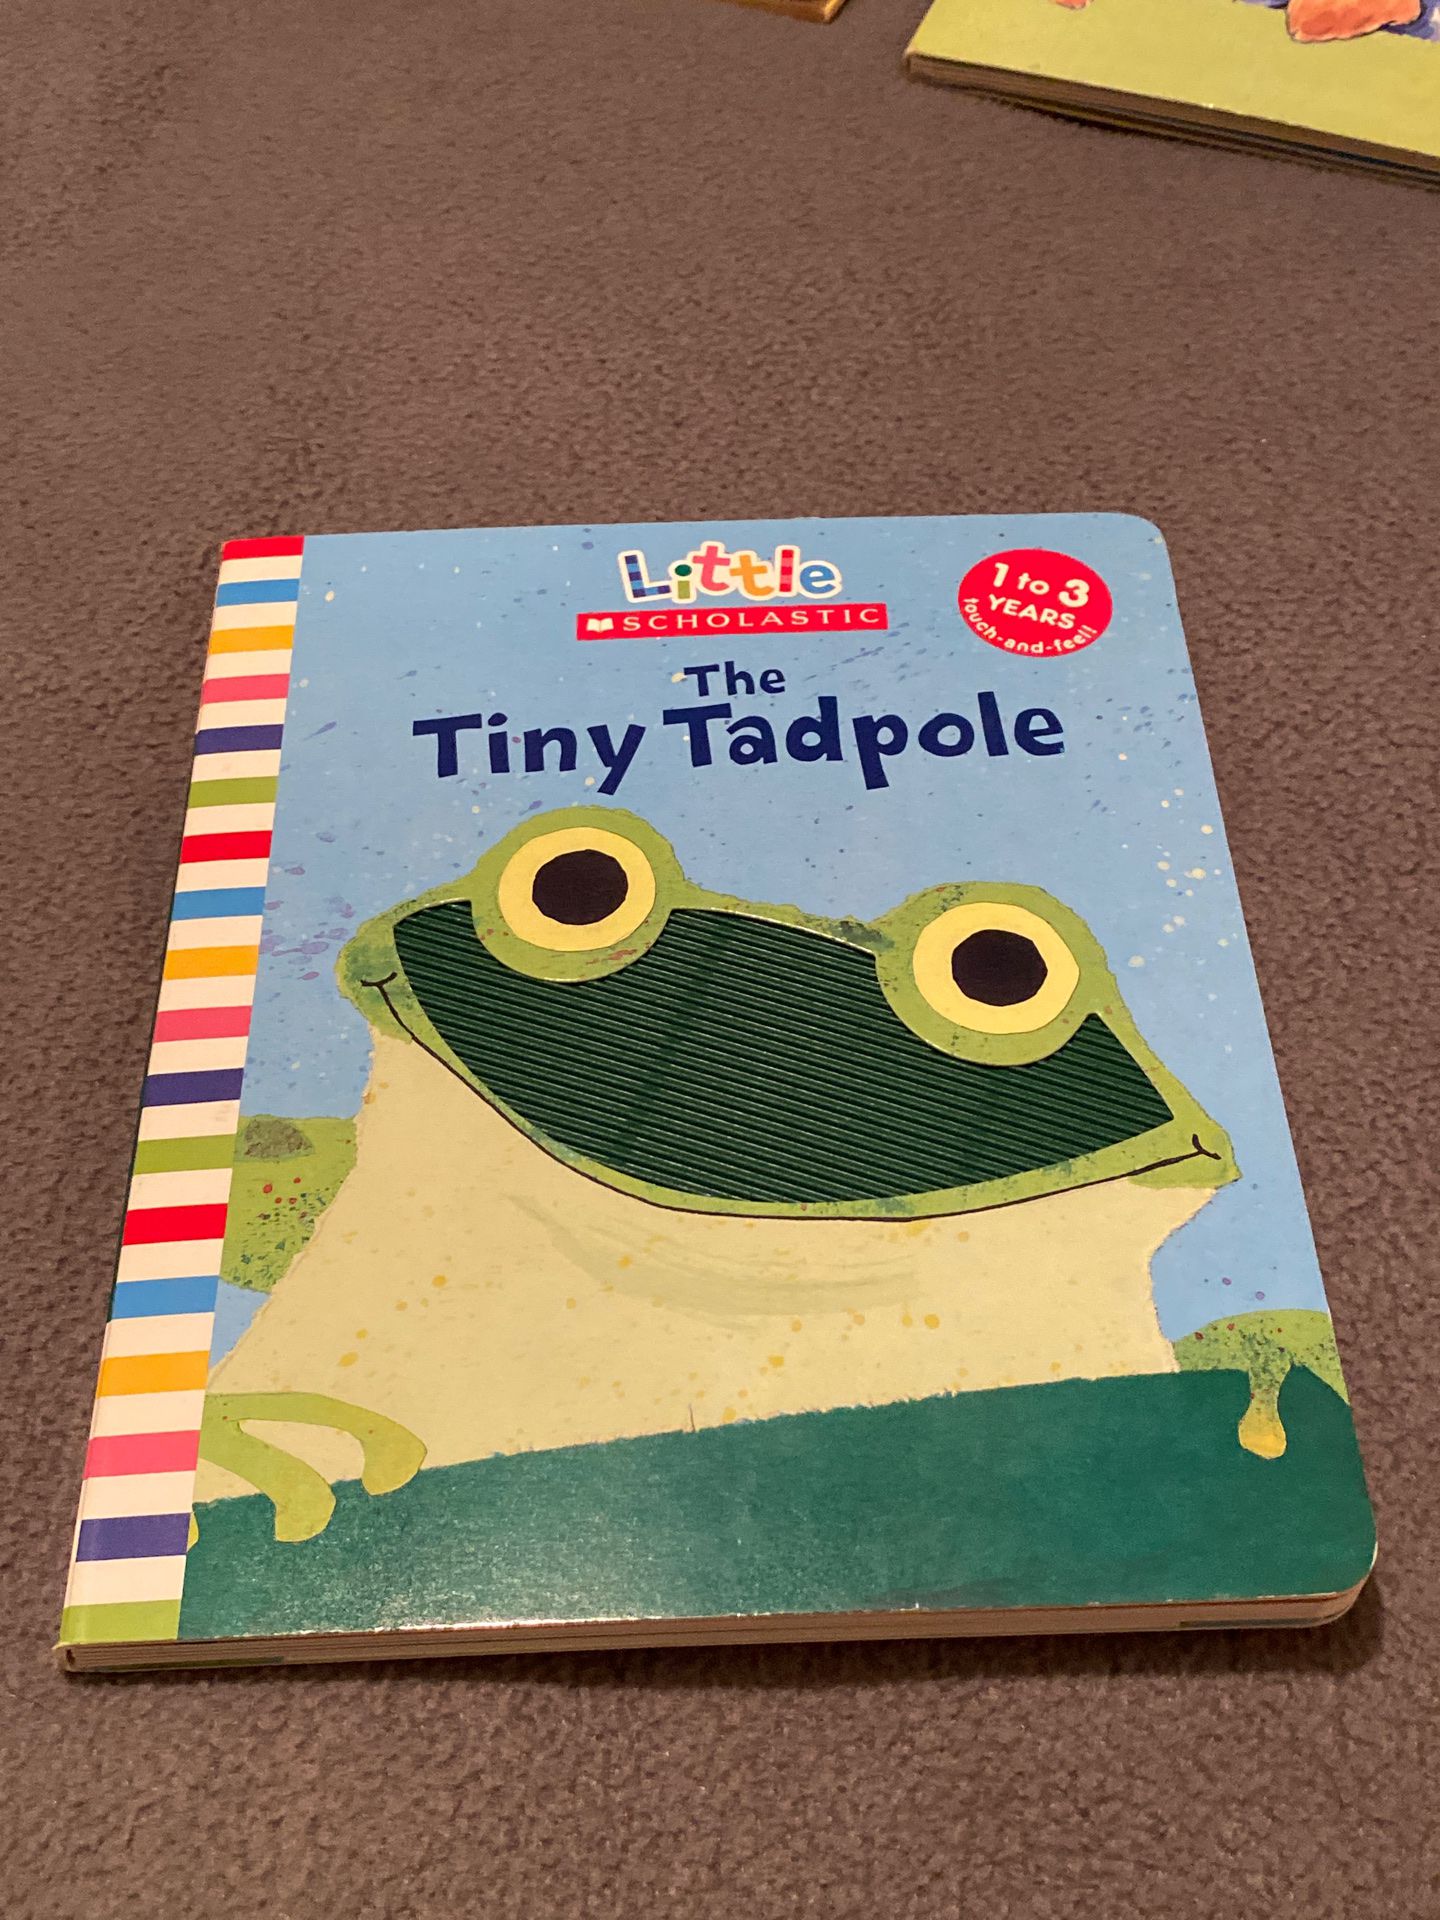 The Tiny Tadpole, touch and feel book, for ages 1-3 by Scholastic